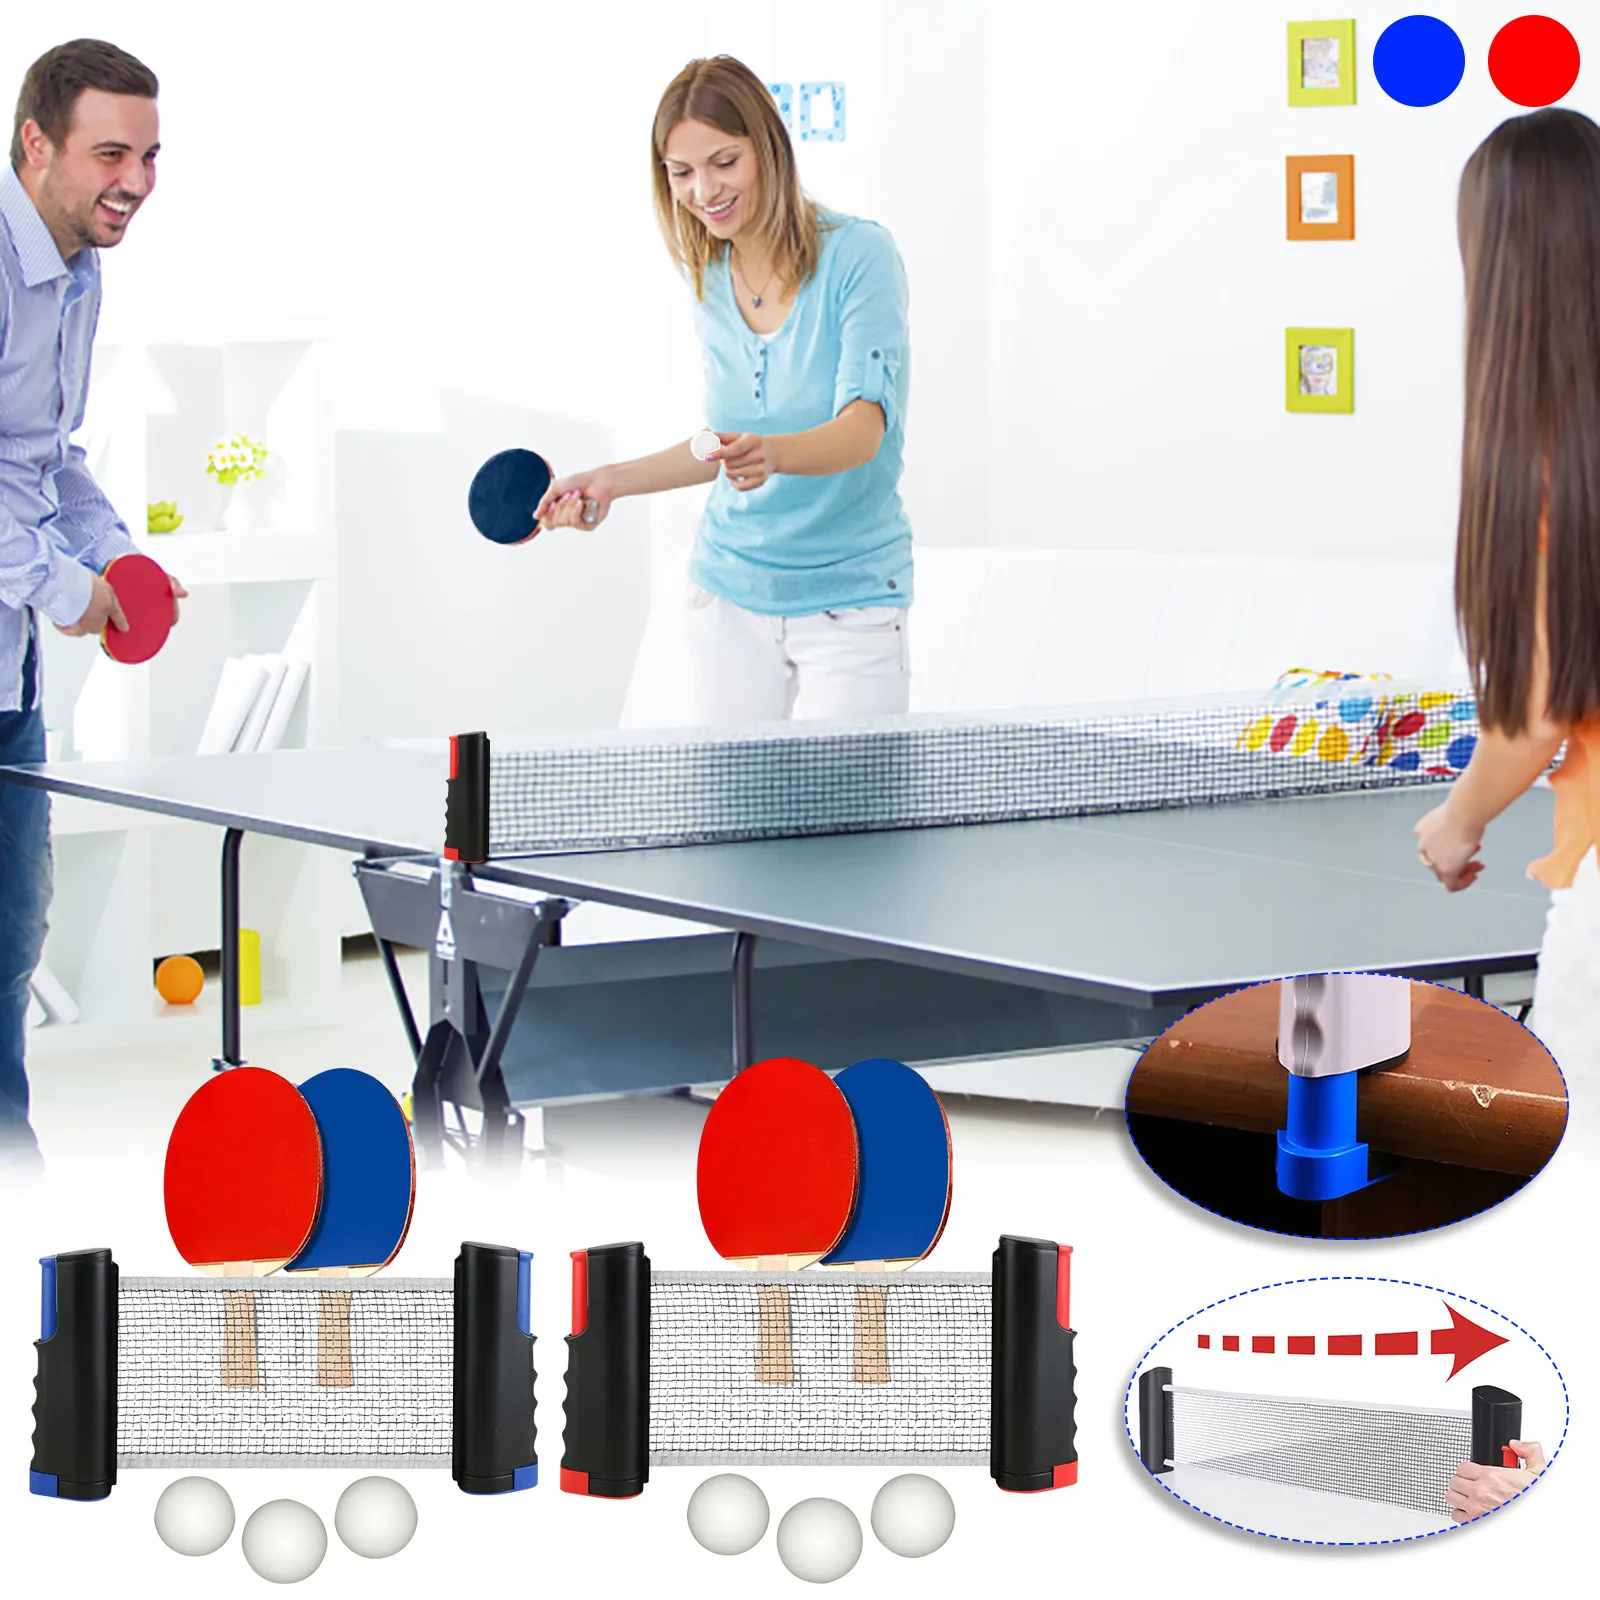 USA Games Retractable Table Tennis Ping Pong Portable Net Kit Replacement BLUE 